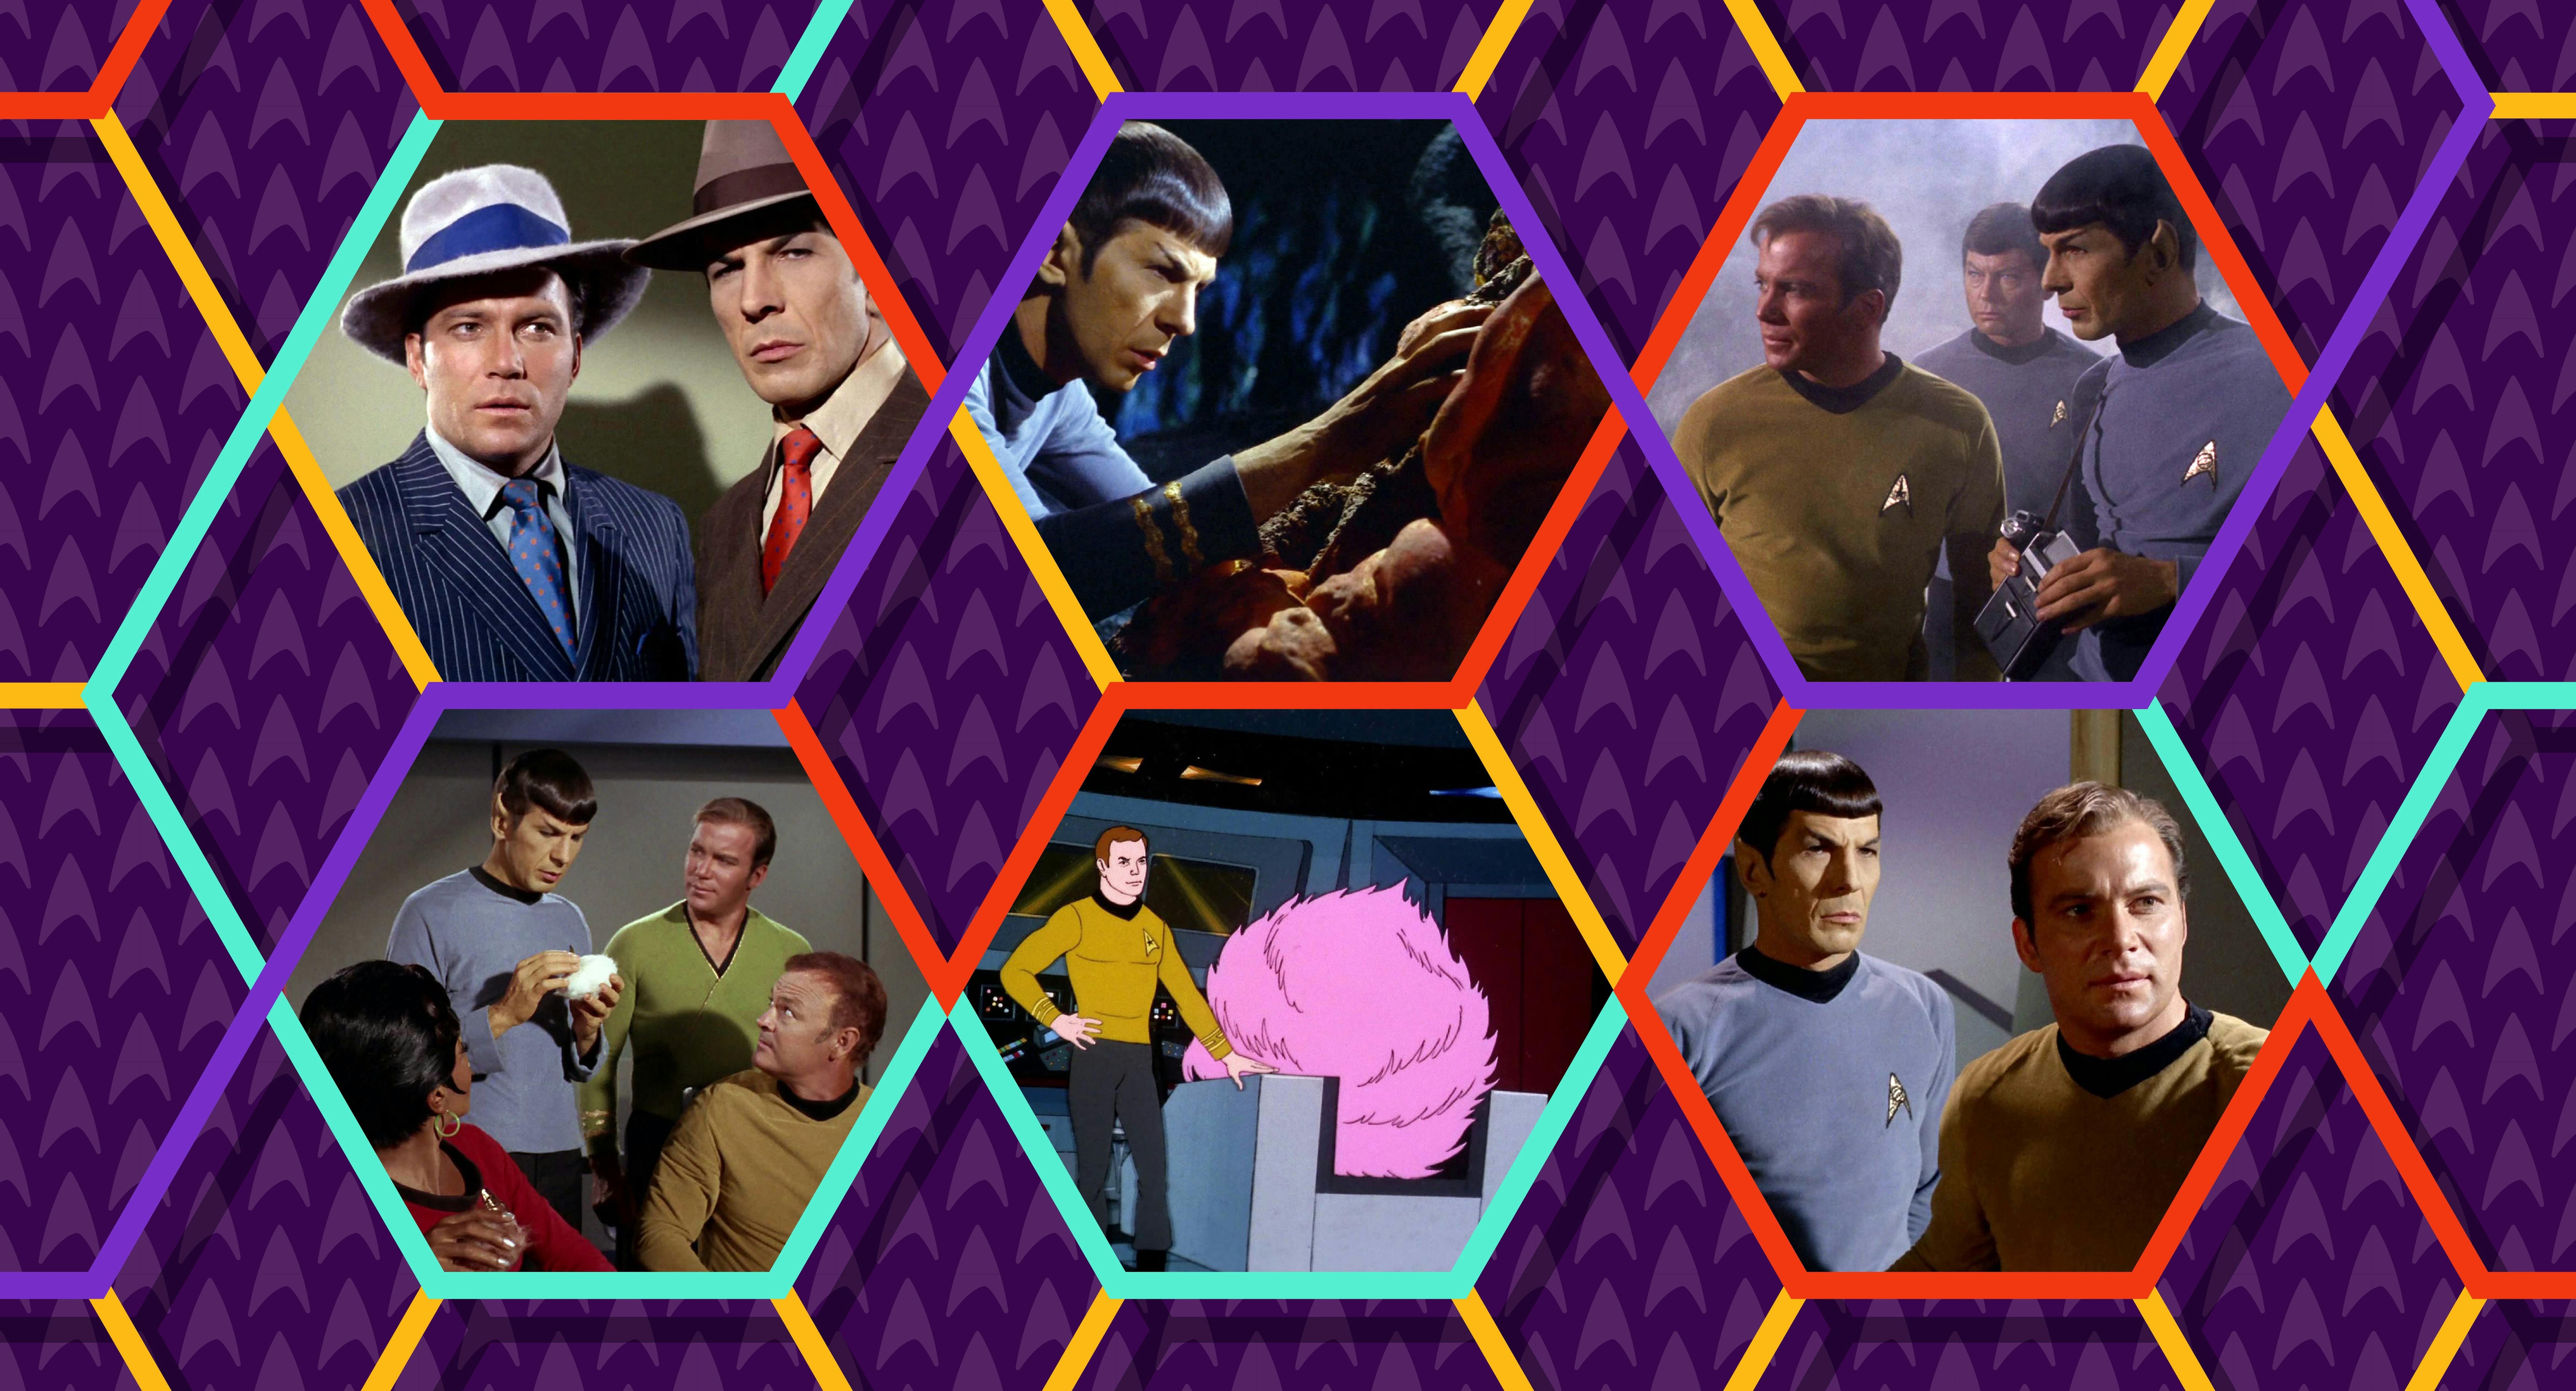 A collage of images from both Star Trek: The Original Series and Star Trek: The Animated Series episodes against a purple background.